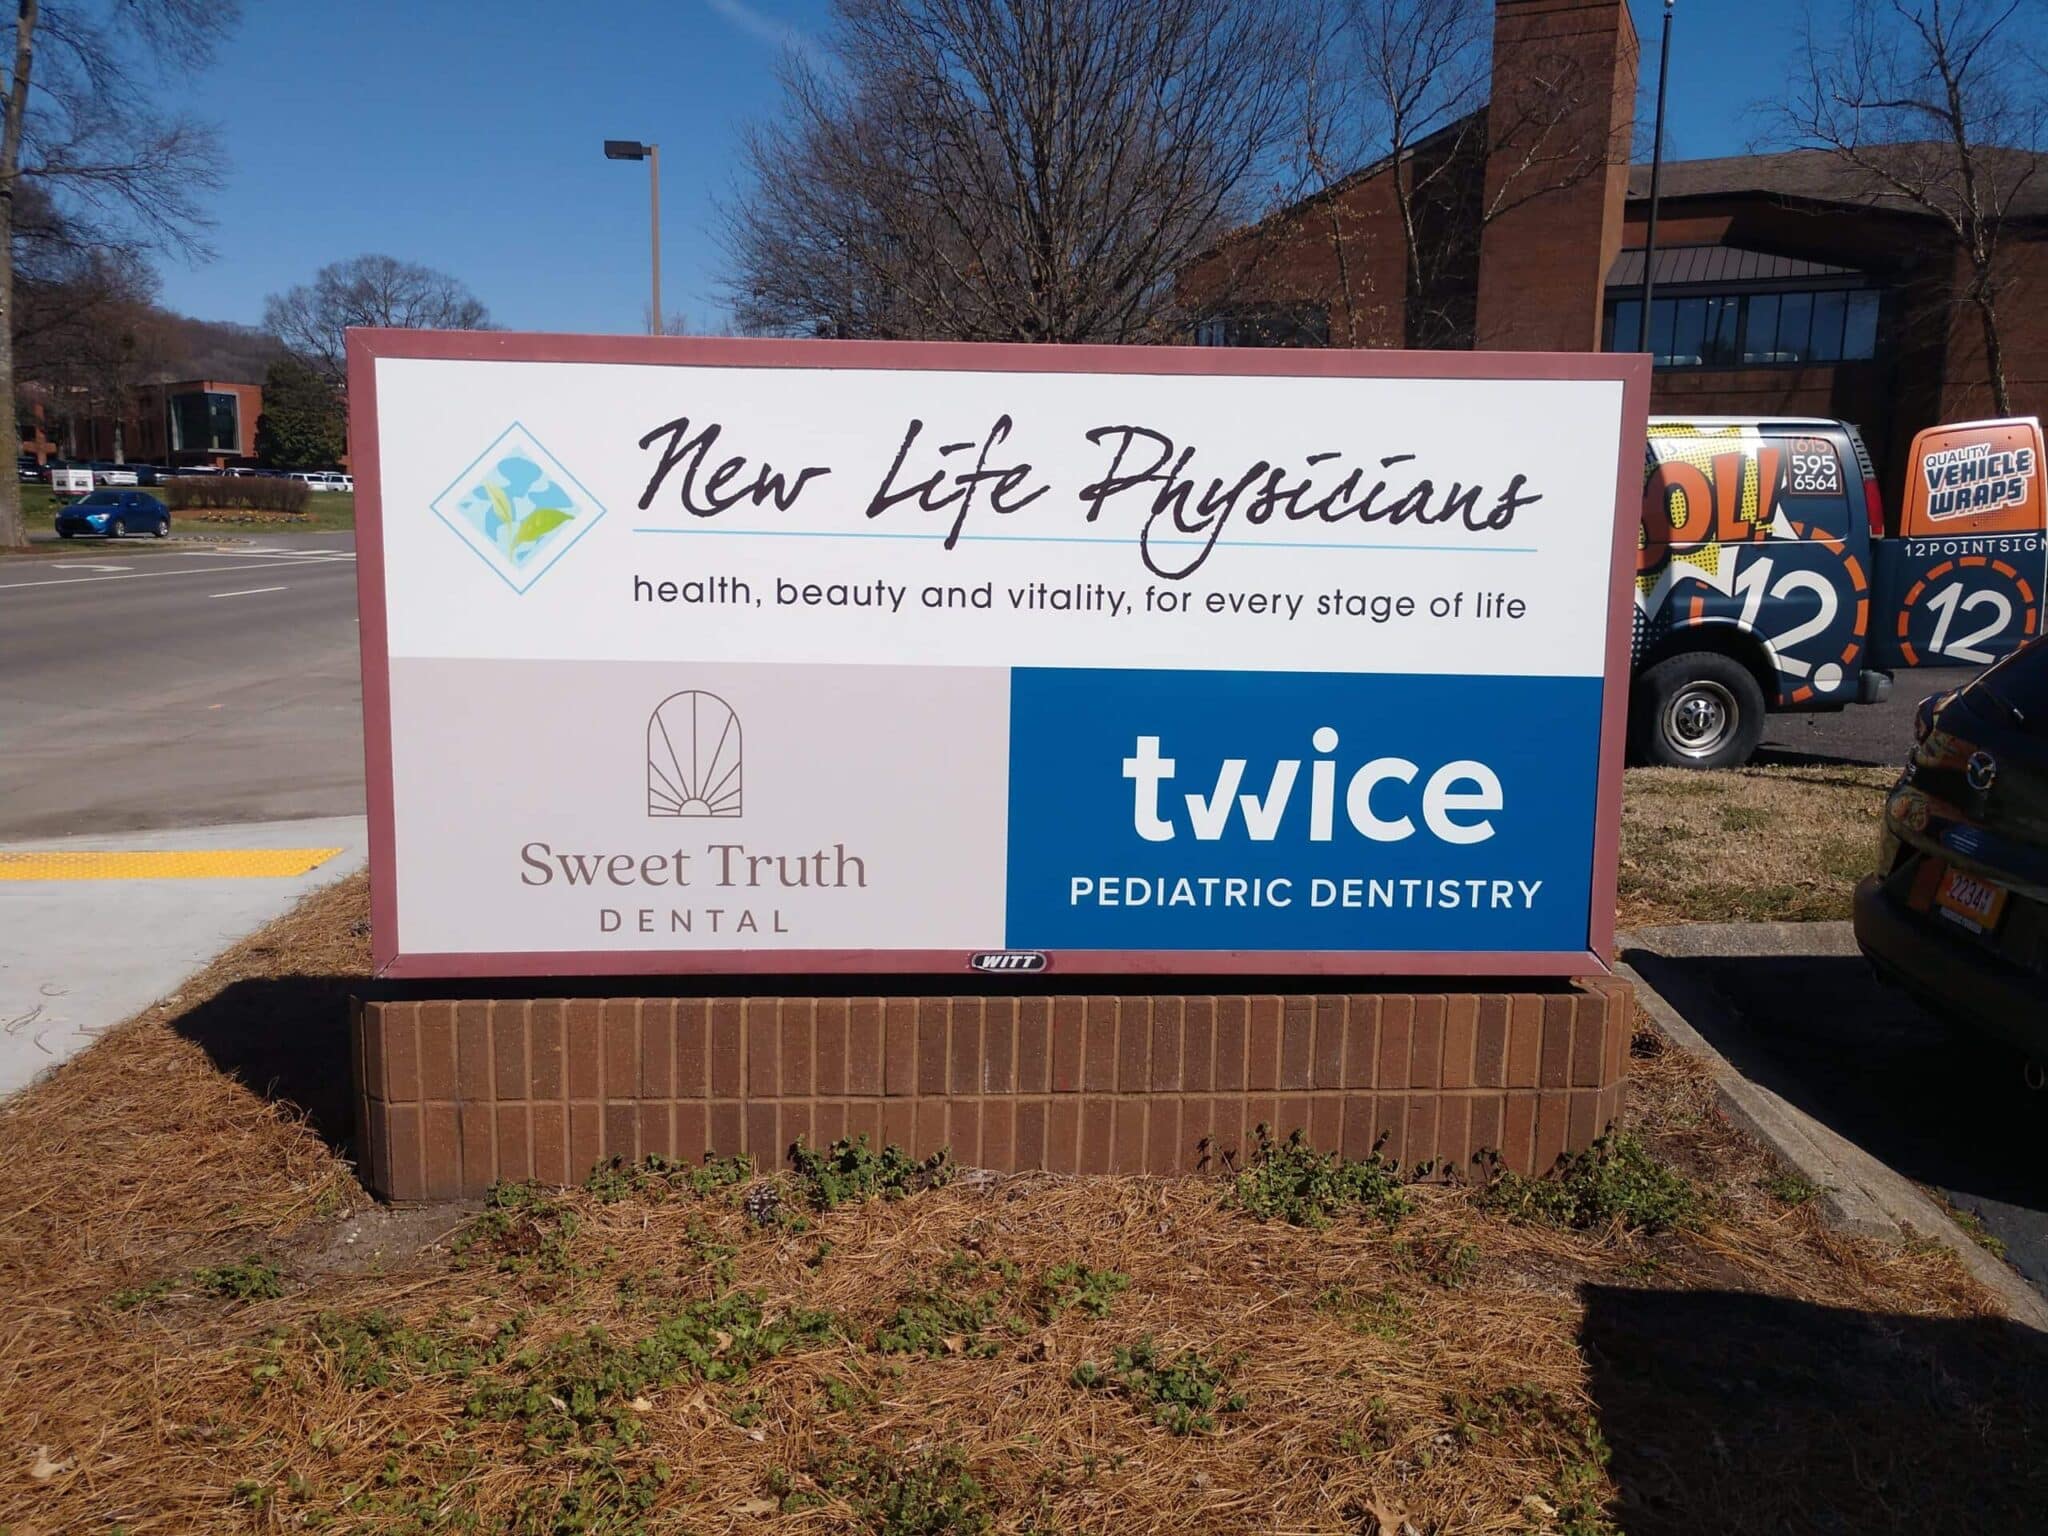 21361 - Monument Face Refresh for Sweet Truth Dental/ Twice Pediatric Dentistry/ Franklin